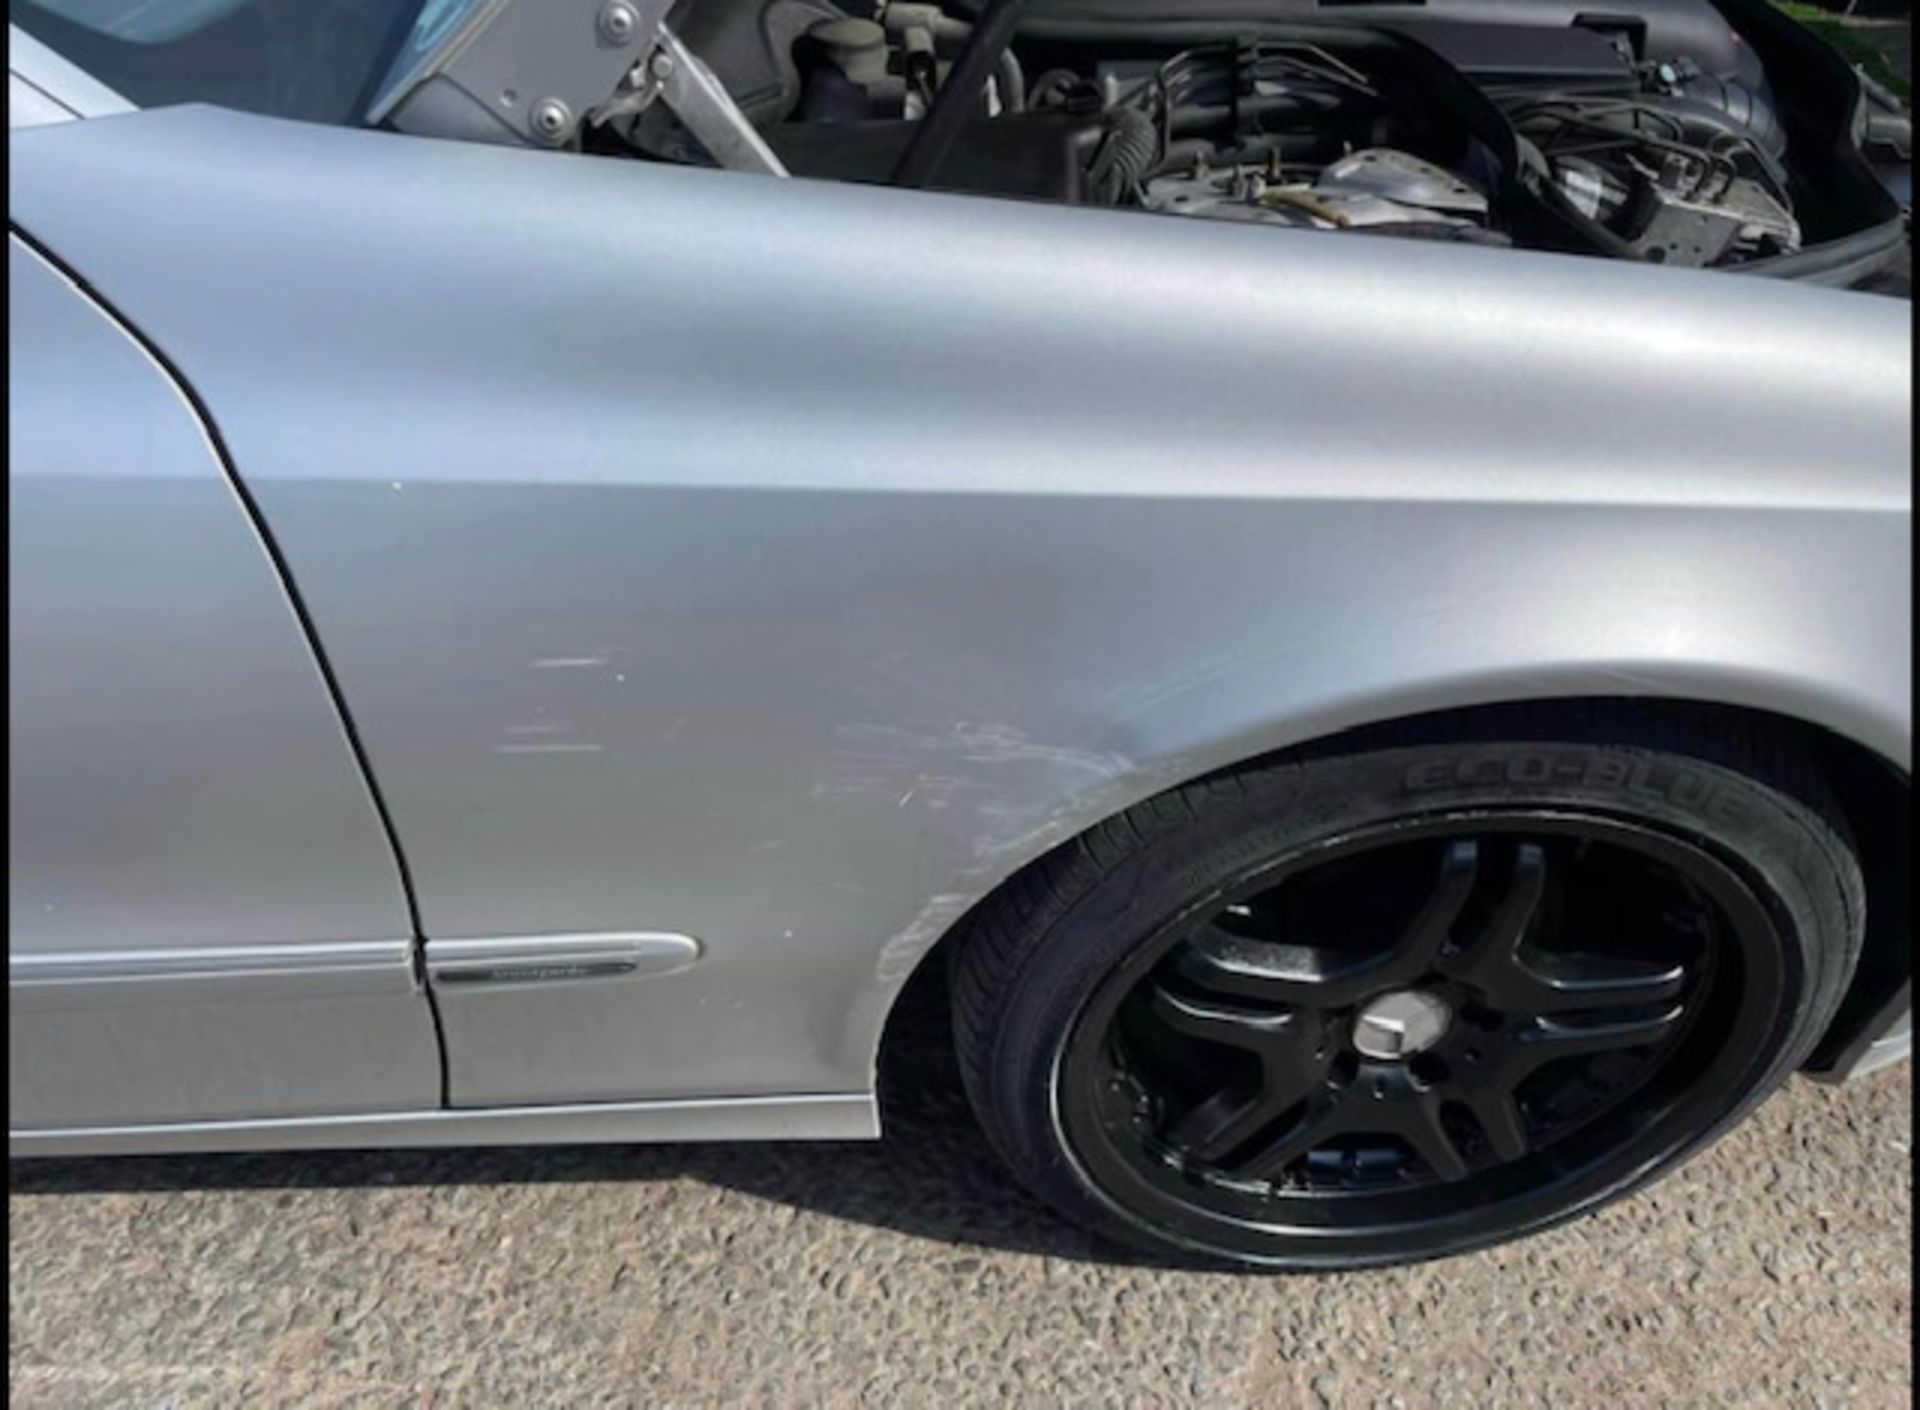 Mercedes E320 CDI 103k genuine miles ,as per pictures has scratches as shown in photos but is all in - Bild 9 aus 14